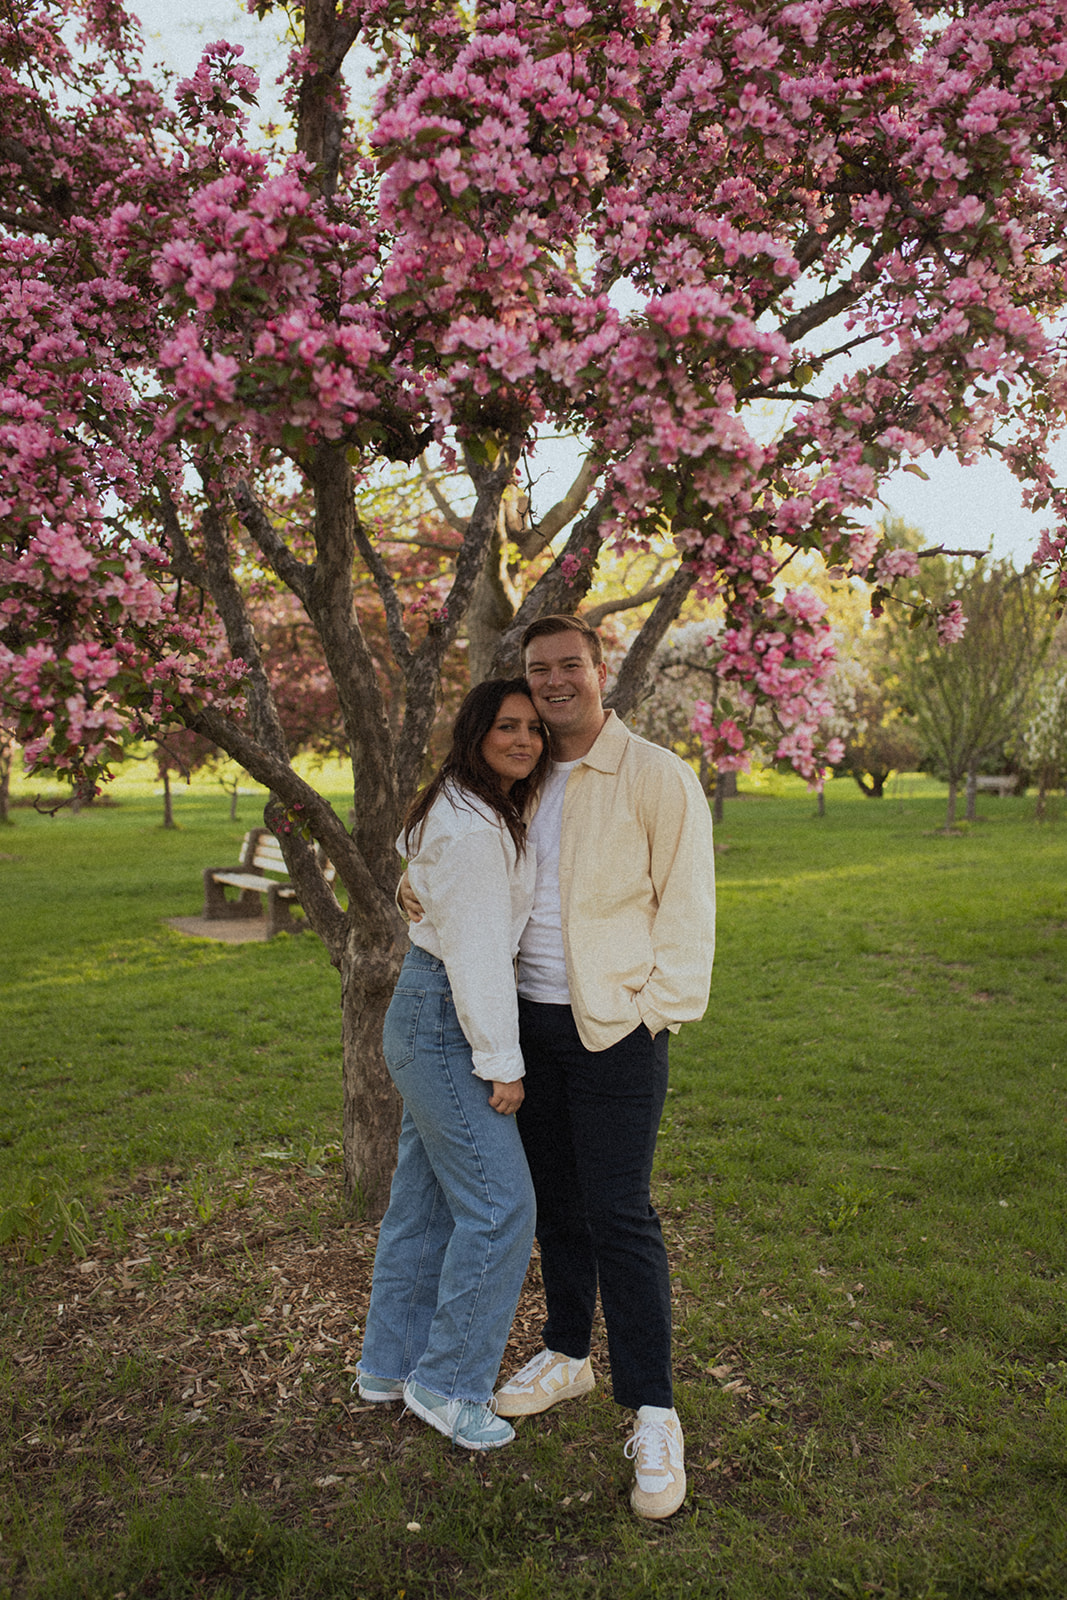 A couple standing together in front of pink blooming trees at sunrise